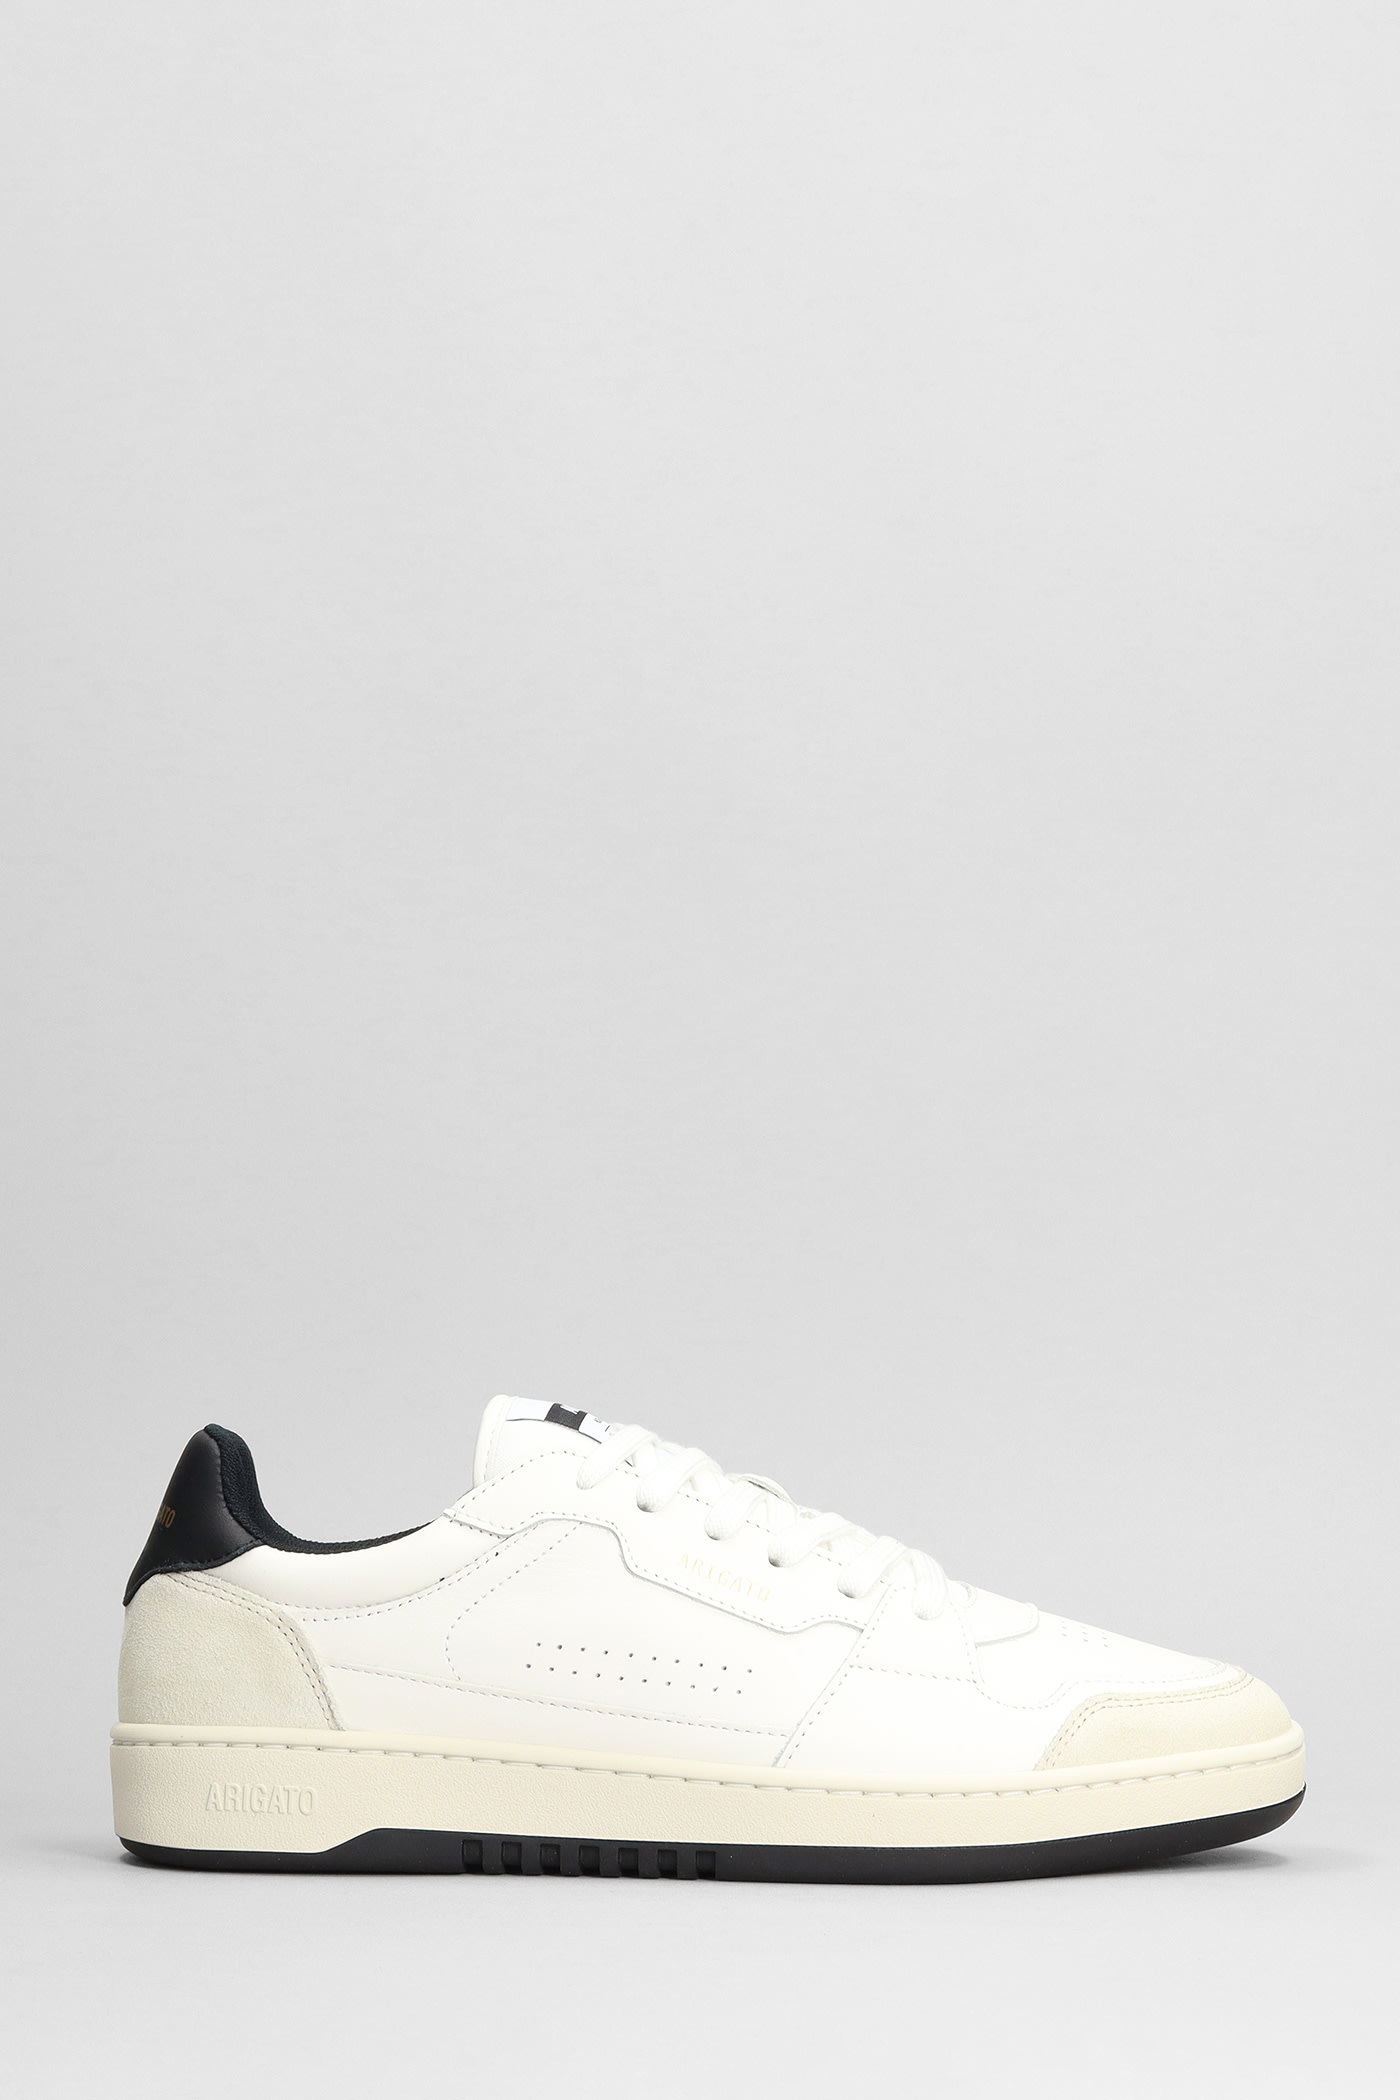 AXEL ARIGATO DICE LO SNEAKERS IN WHITE SUEDE AND LEATHER